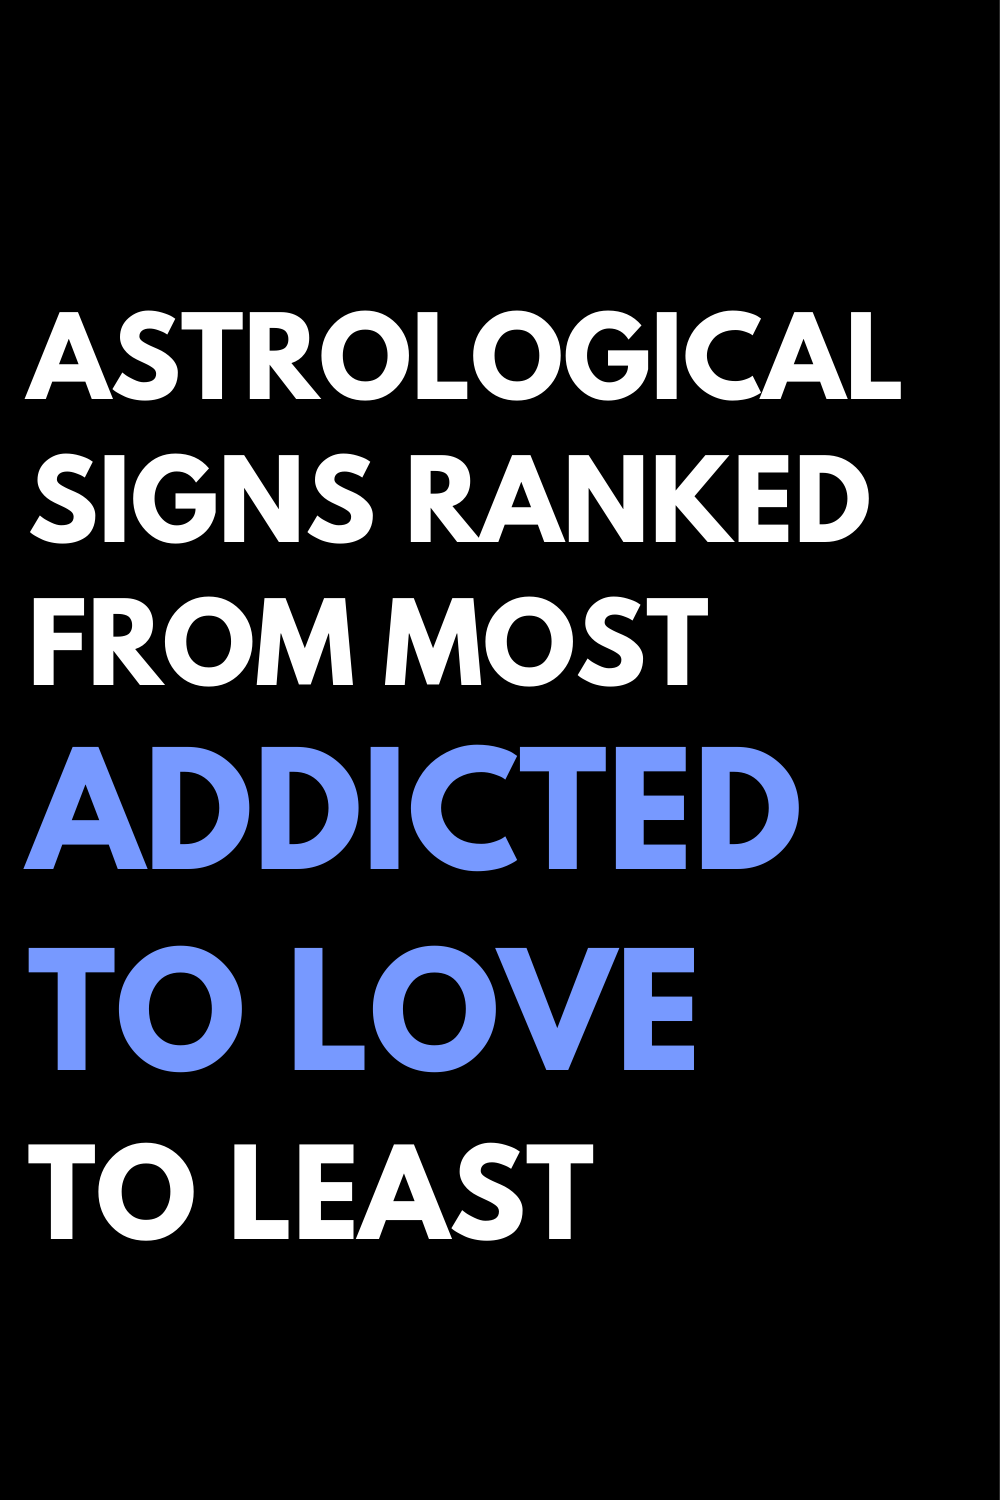 Astrological signs ranked from most addicted to love to least